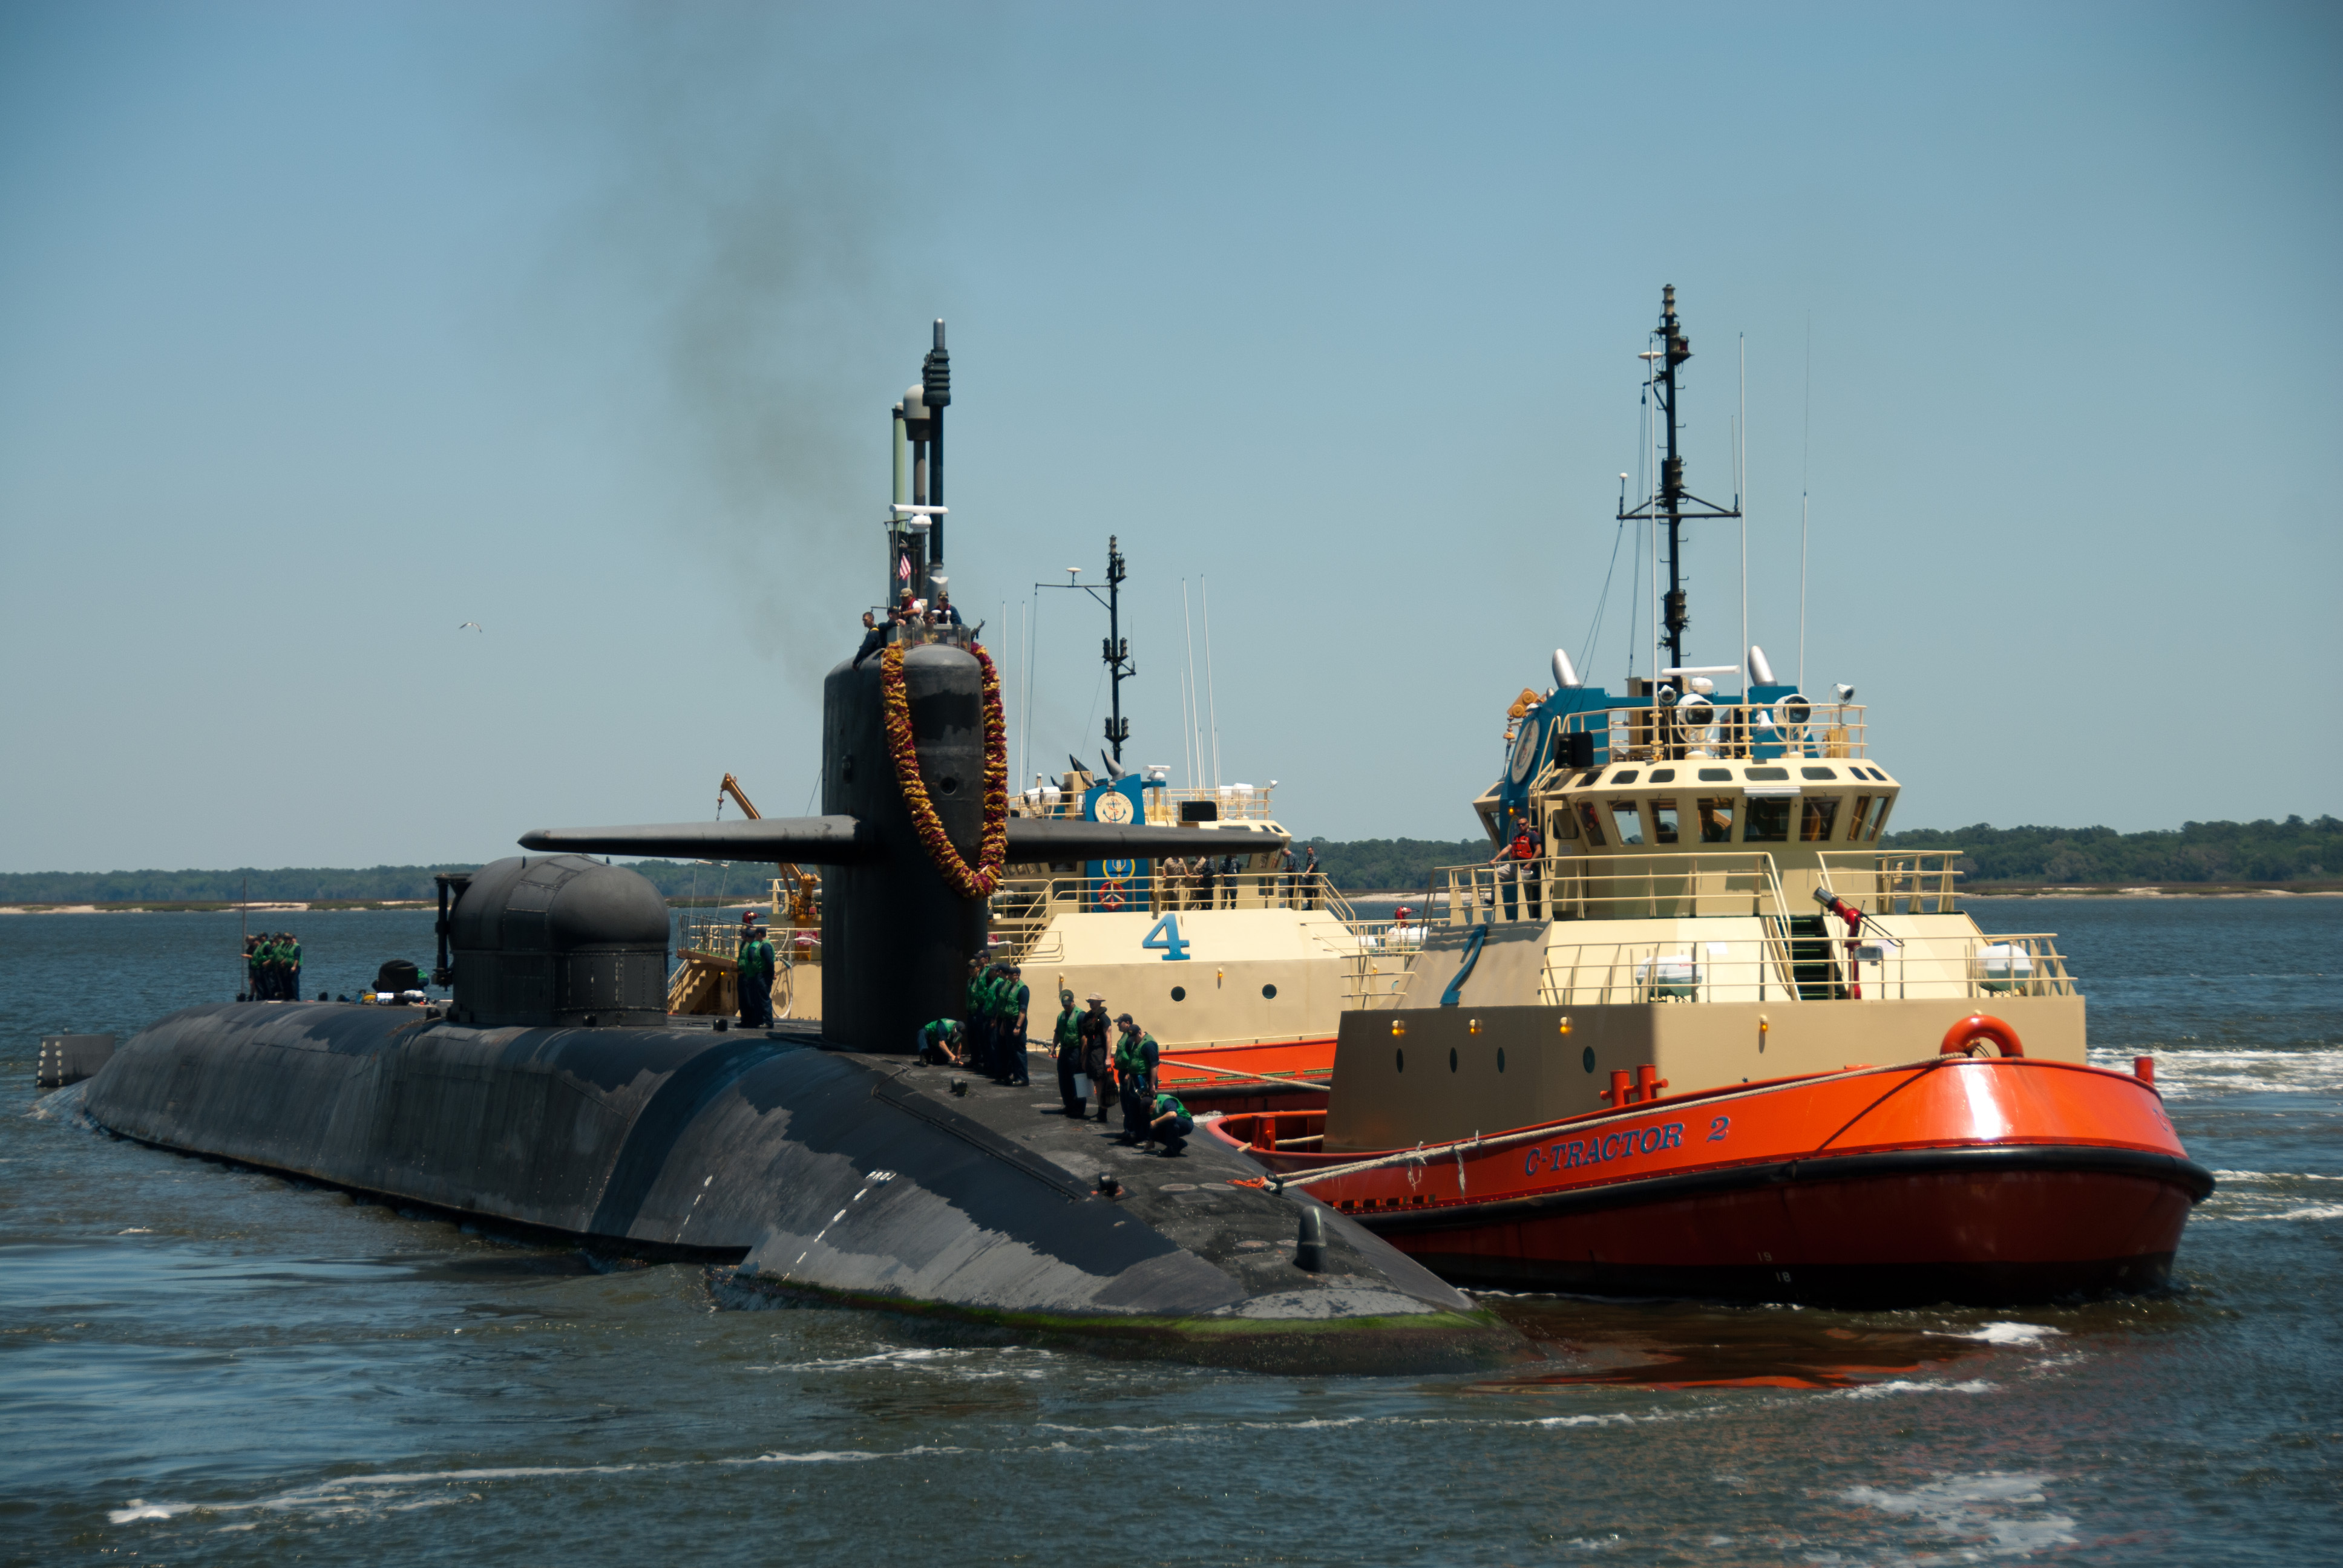 The Ohio-class guided-missile submarine USS Florida (SSGN 728) arrives at Naval Submarine Base Kings Bay in April 2011. Florida returned after a 15-month deployment that included participated in Operation Odyssey Dawn, making the boat the first guided-missile submarine to launch Tomahawk land attack missiles. US Navy photo.